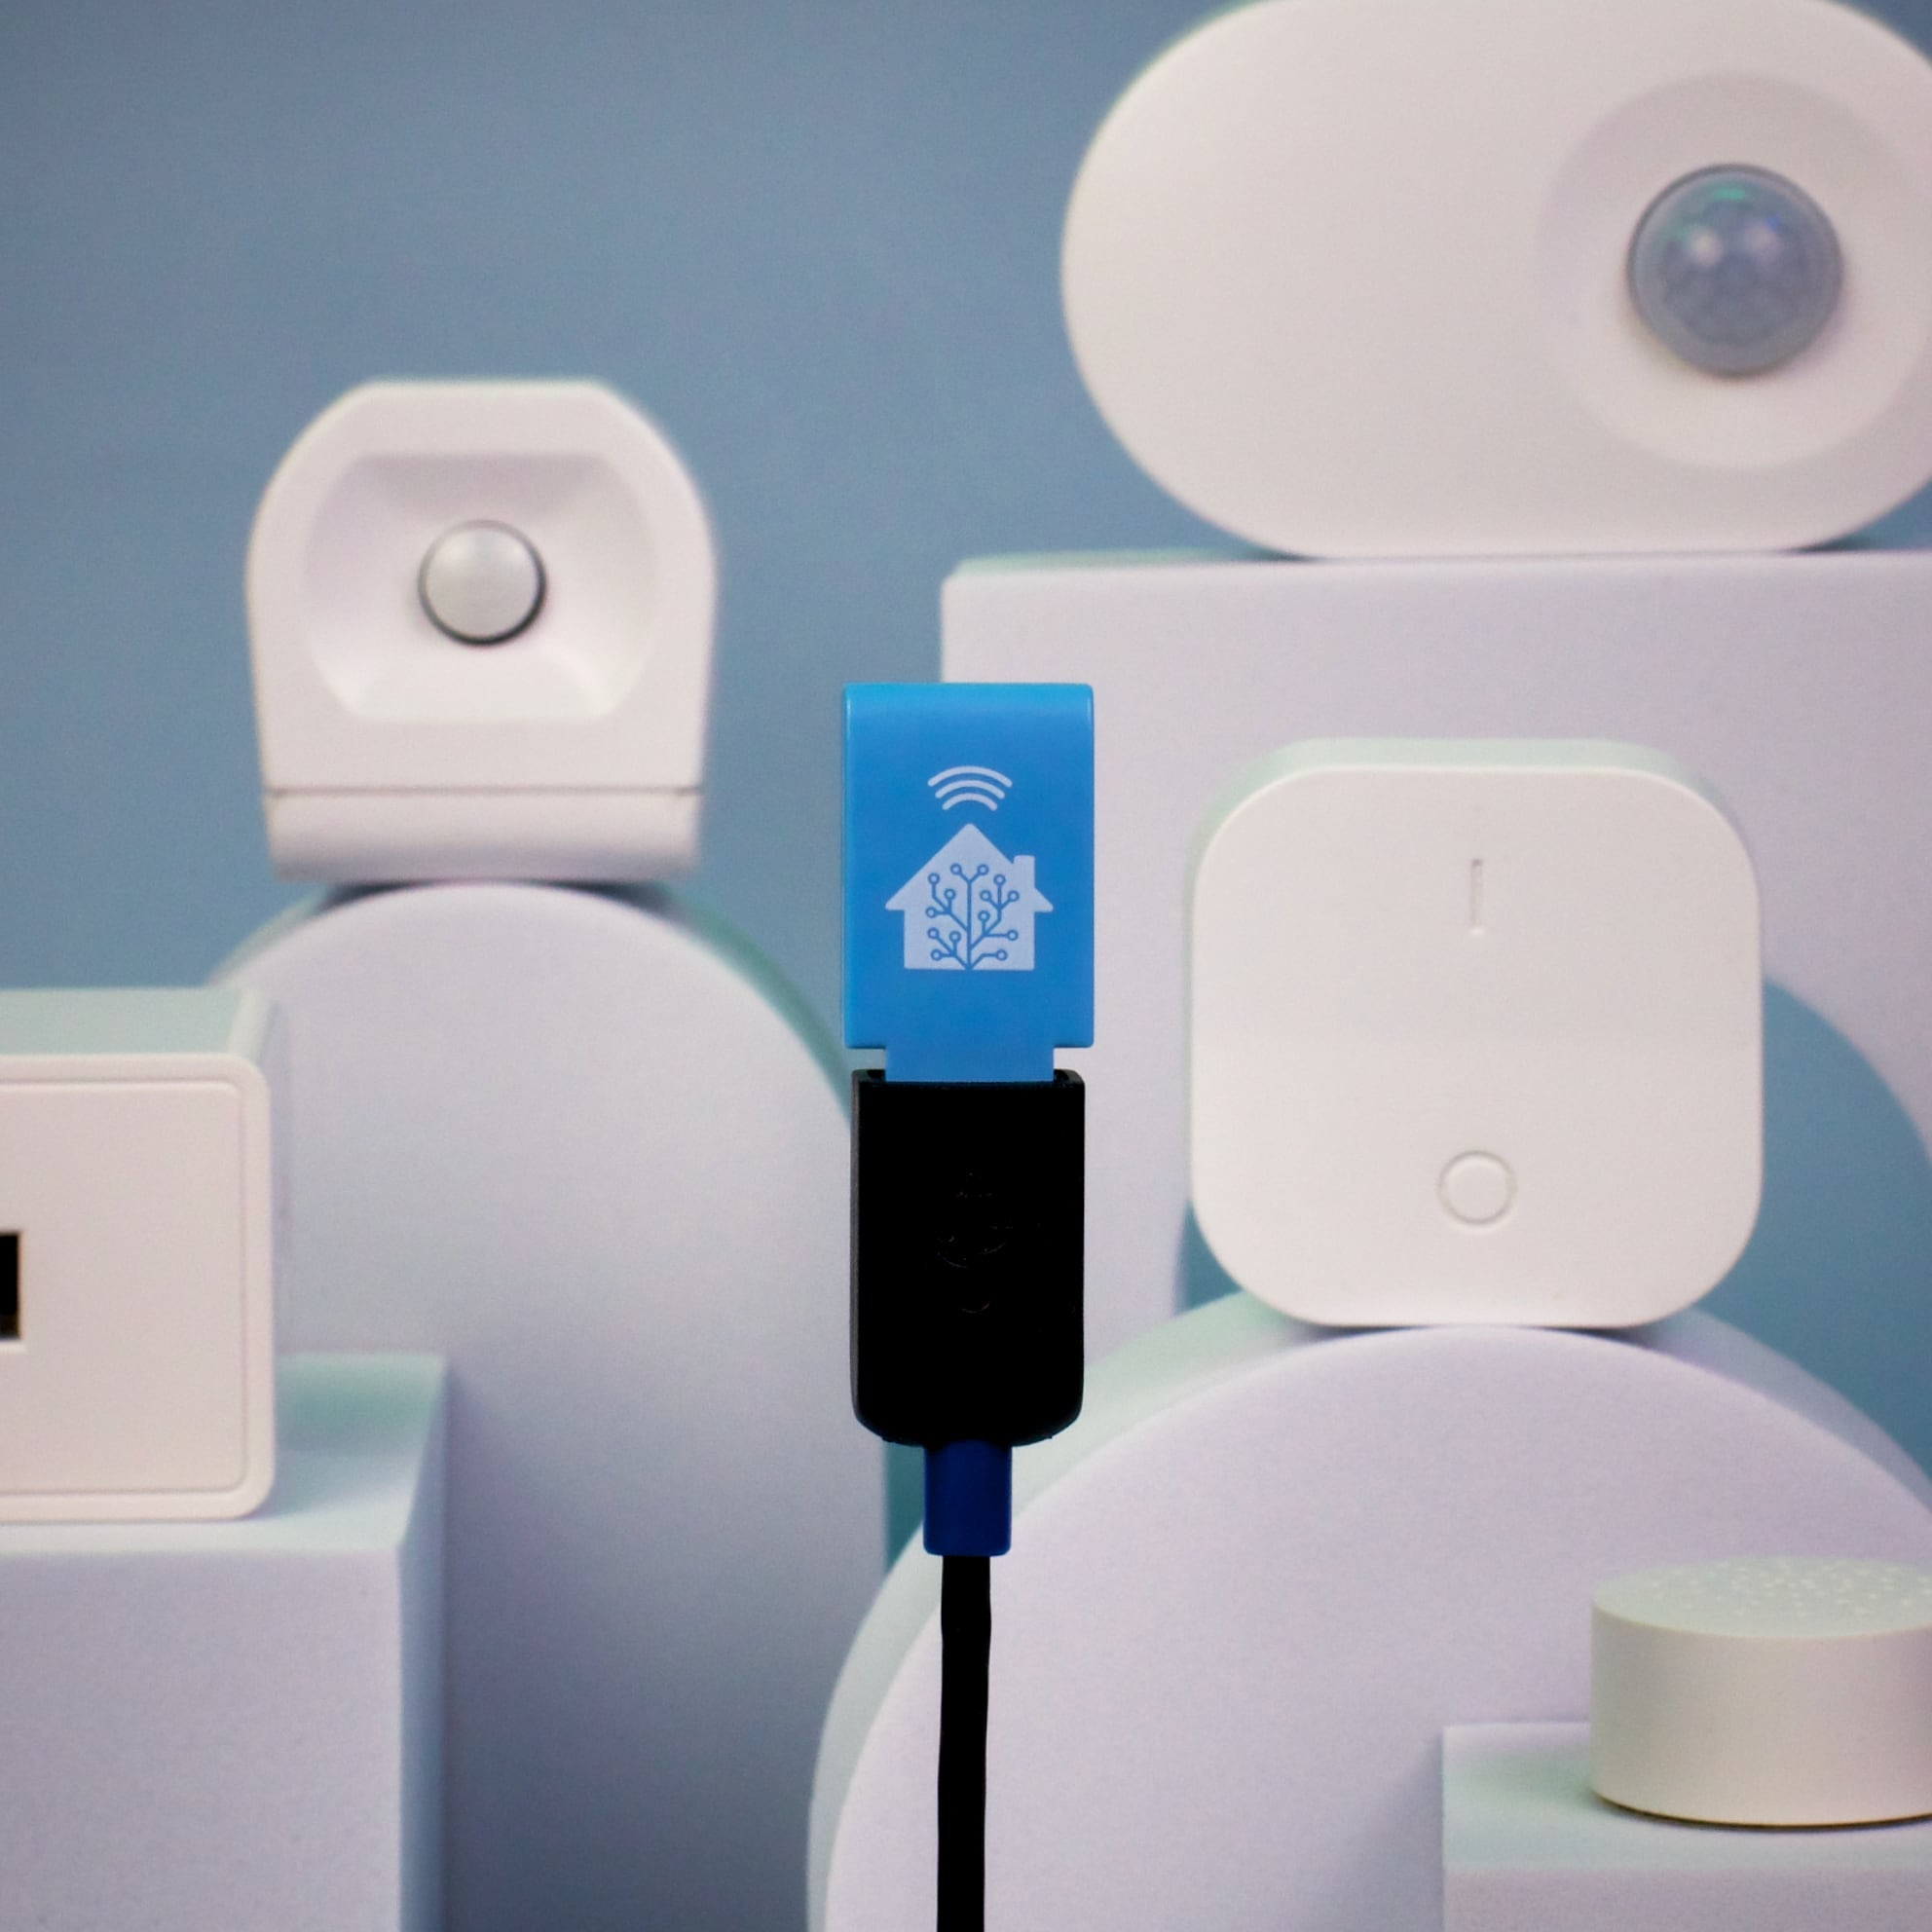 Image of the Zigbee USB stick hovering in the air with IoT devices behind it